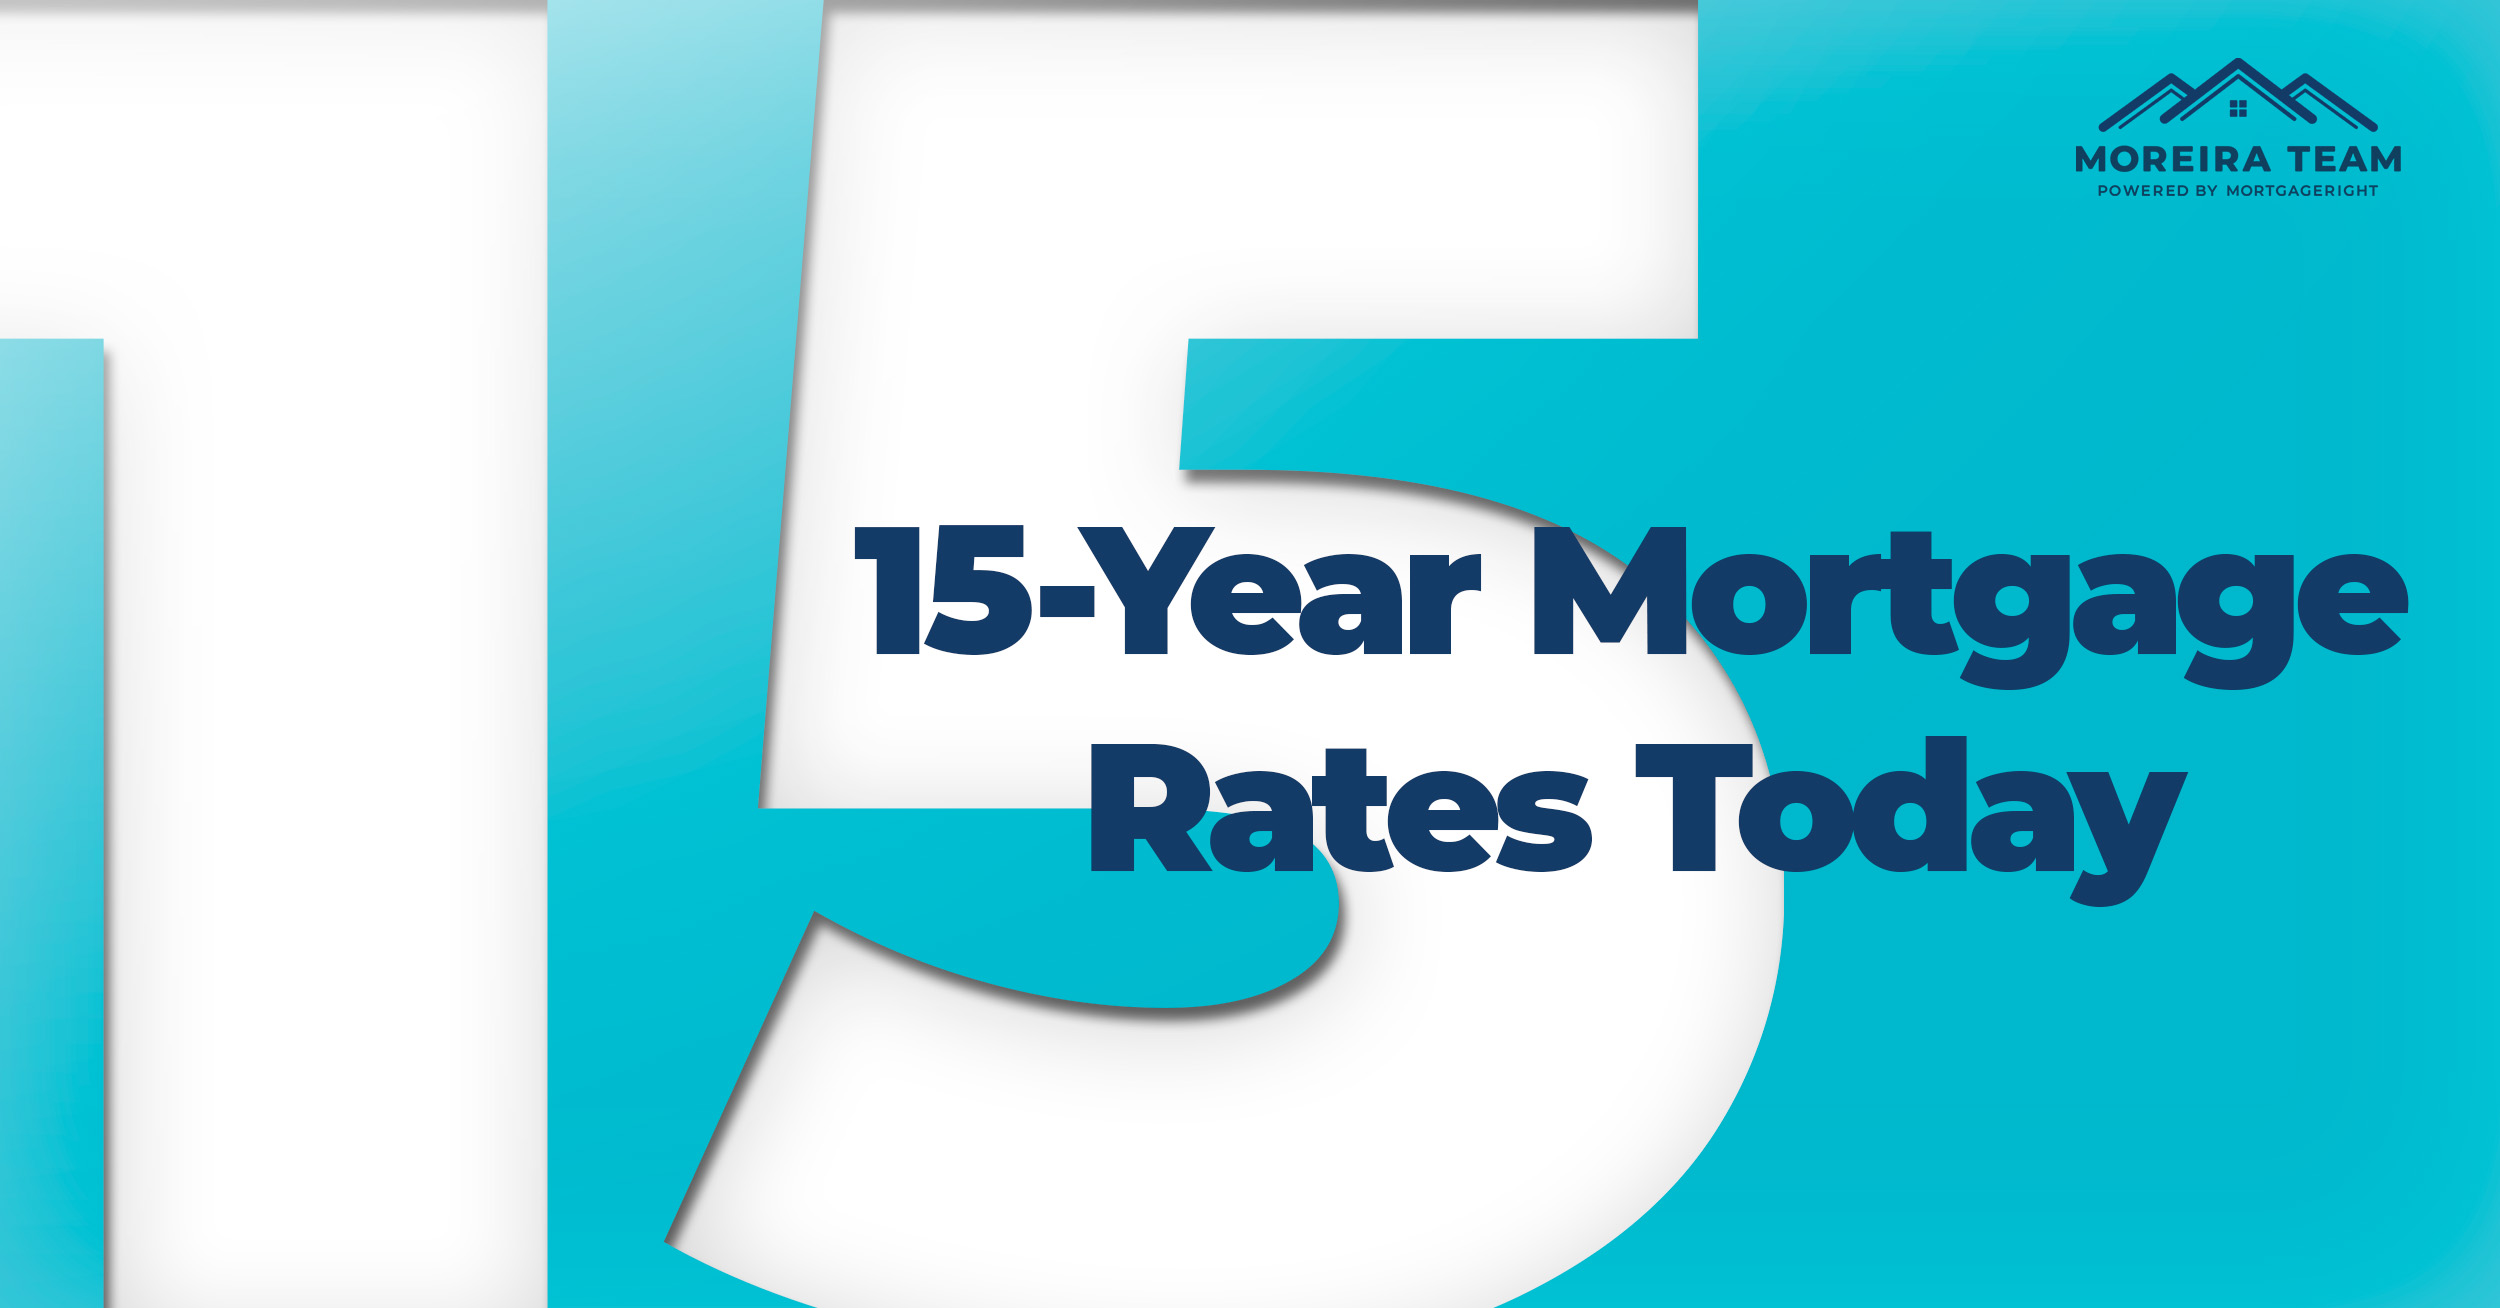 Latest on 15-Year Mortgage Rates Today